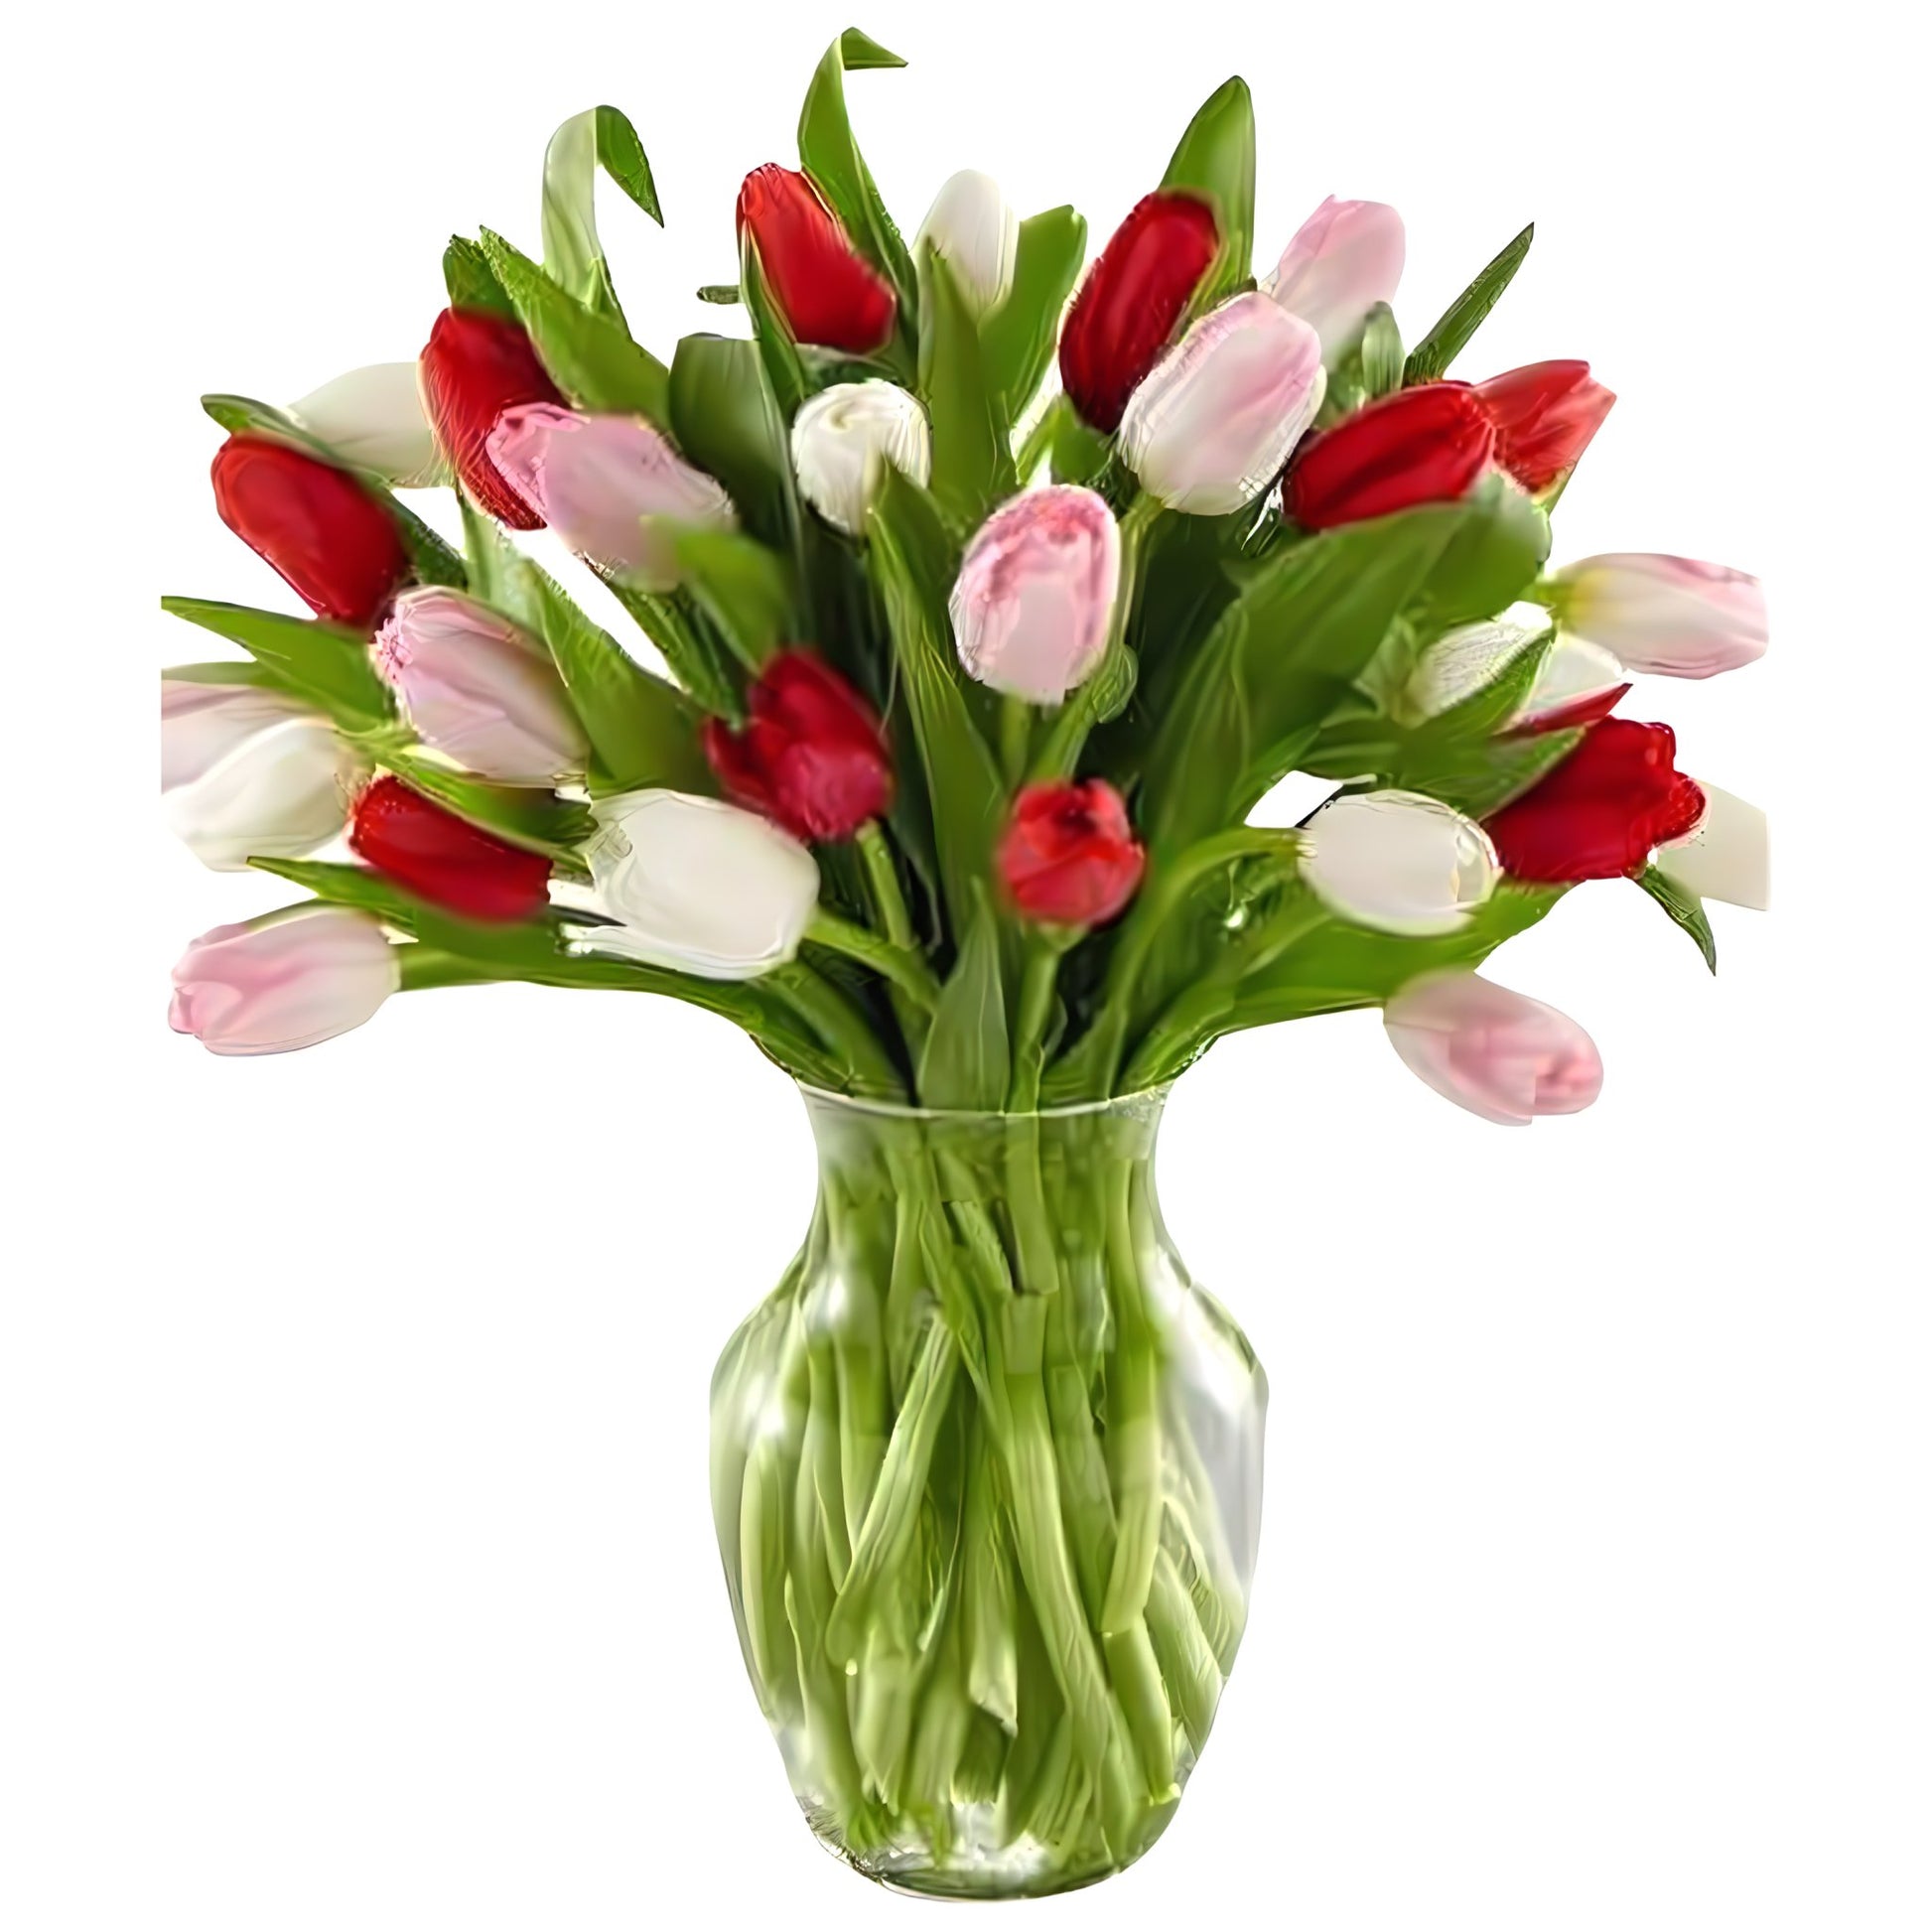 Tulips Of Love - Valentine's Day - Queens Flower Delivery